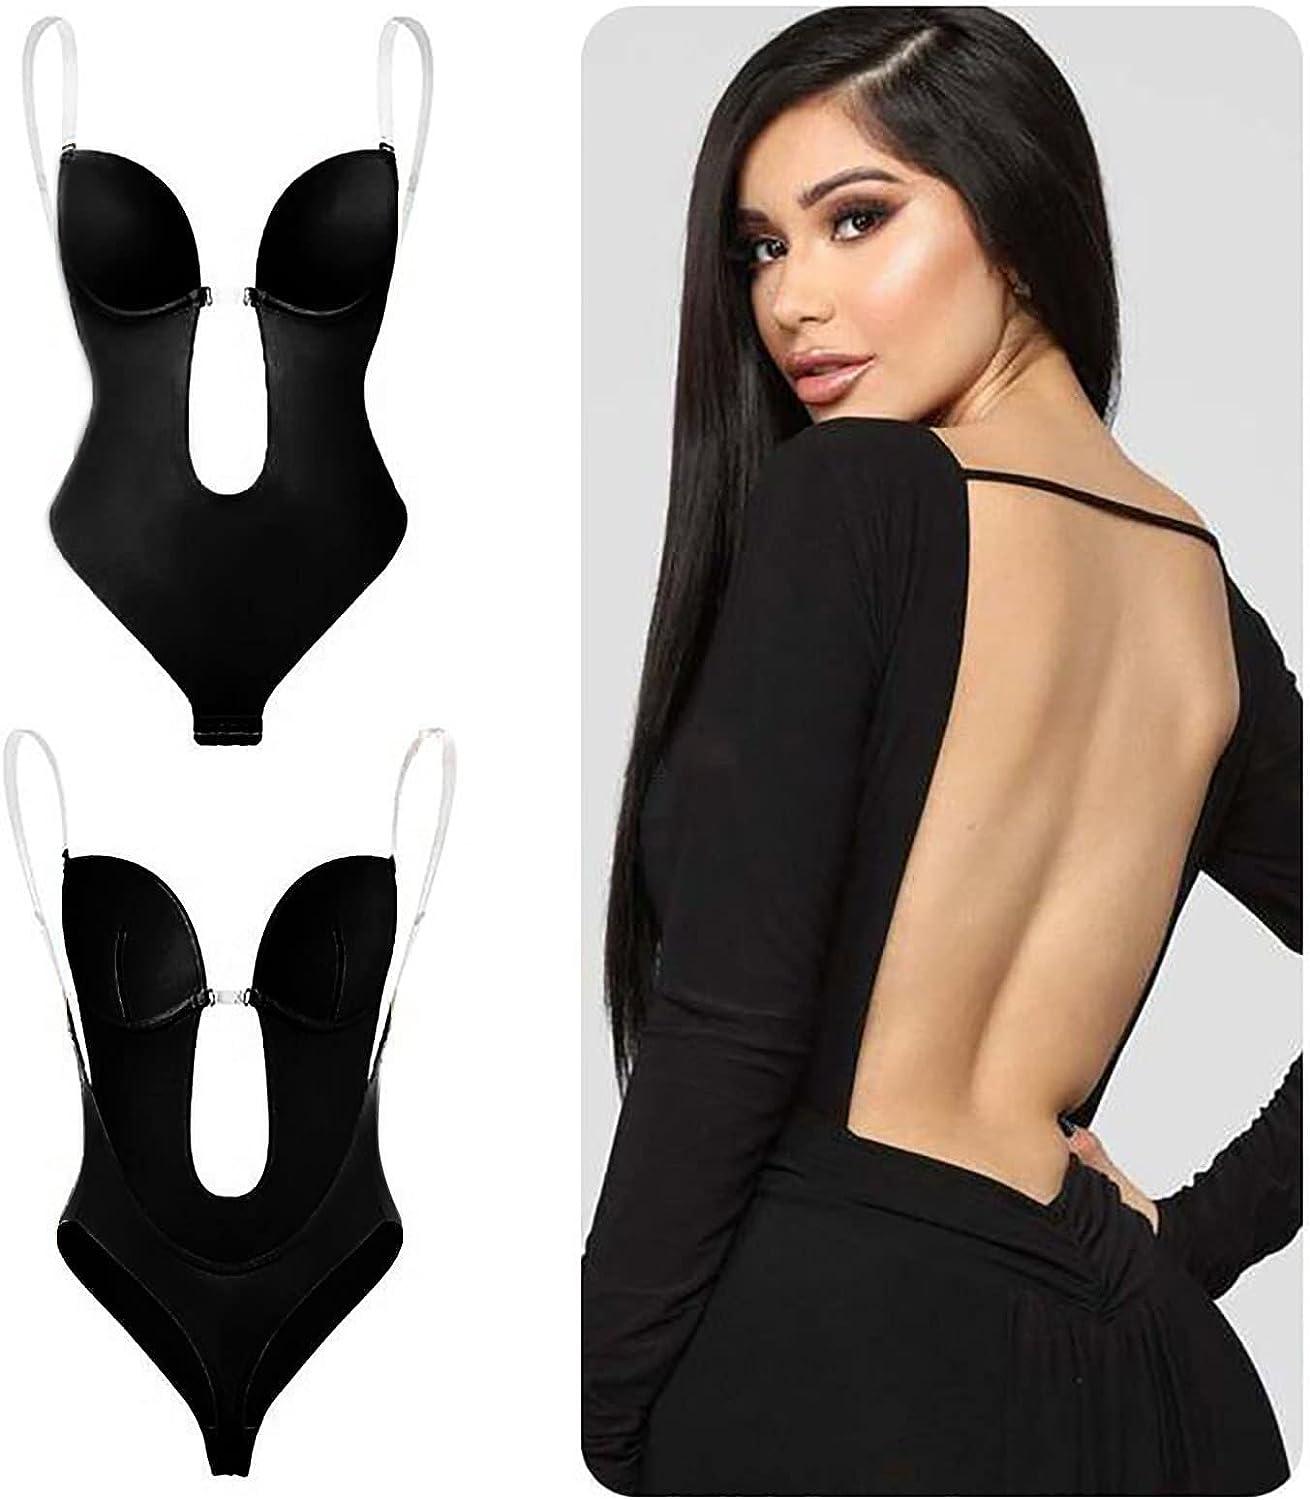 Backless smooth wedding bodysuit shaper with Plunge Bra